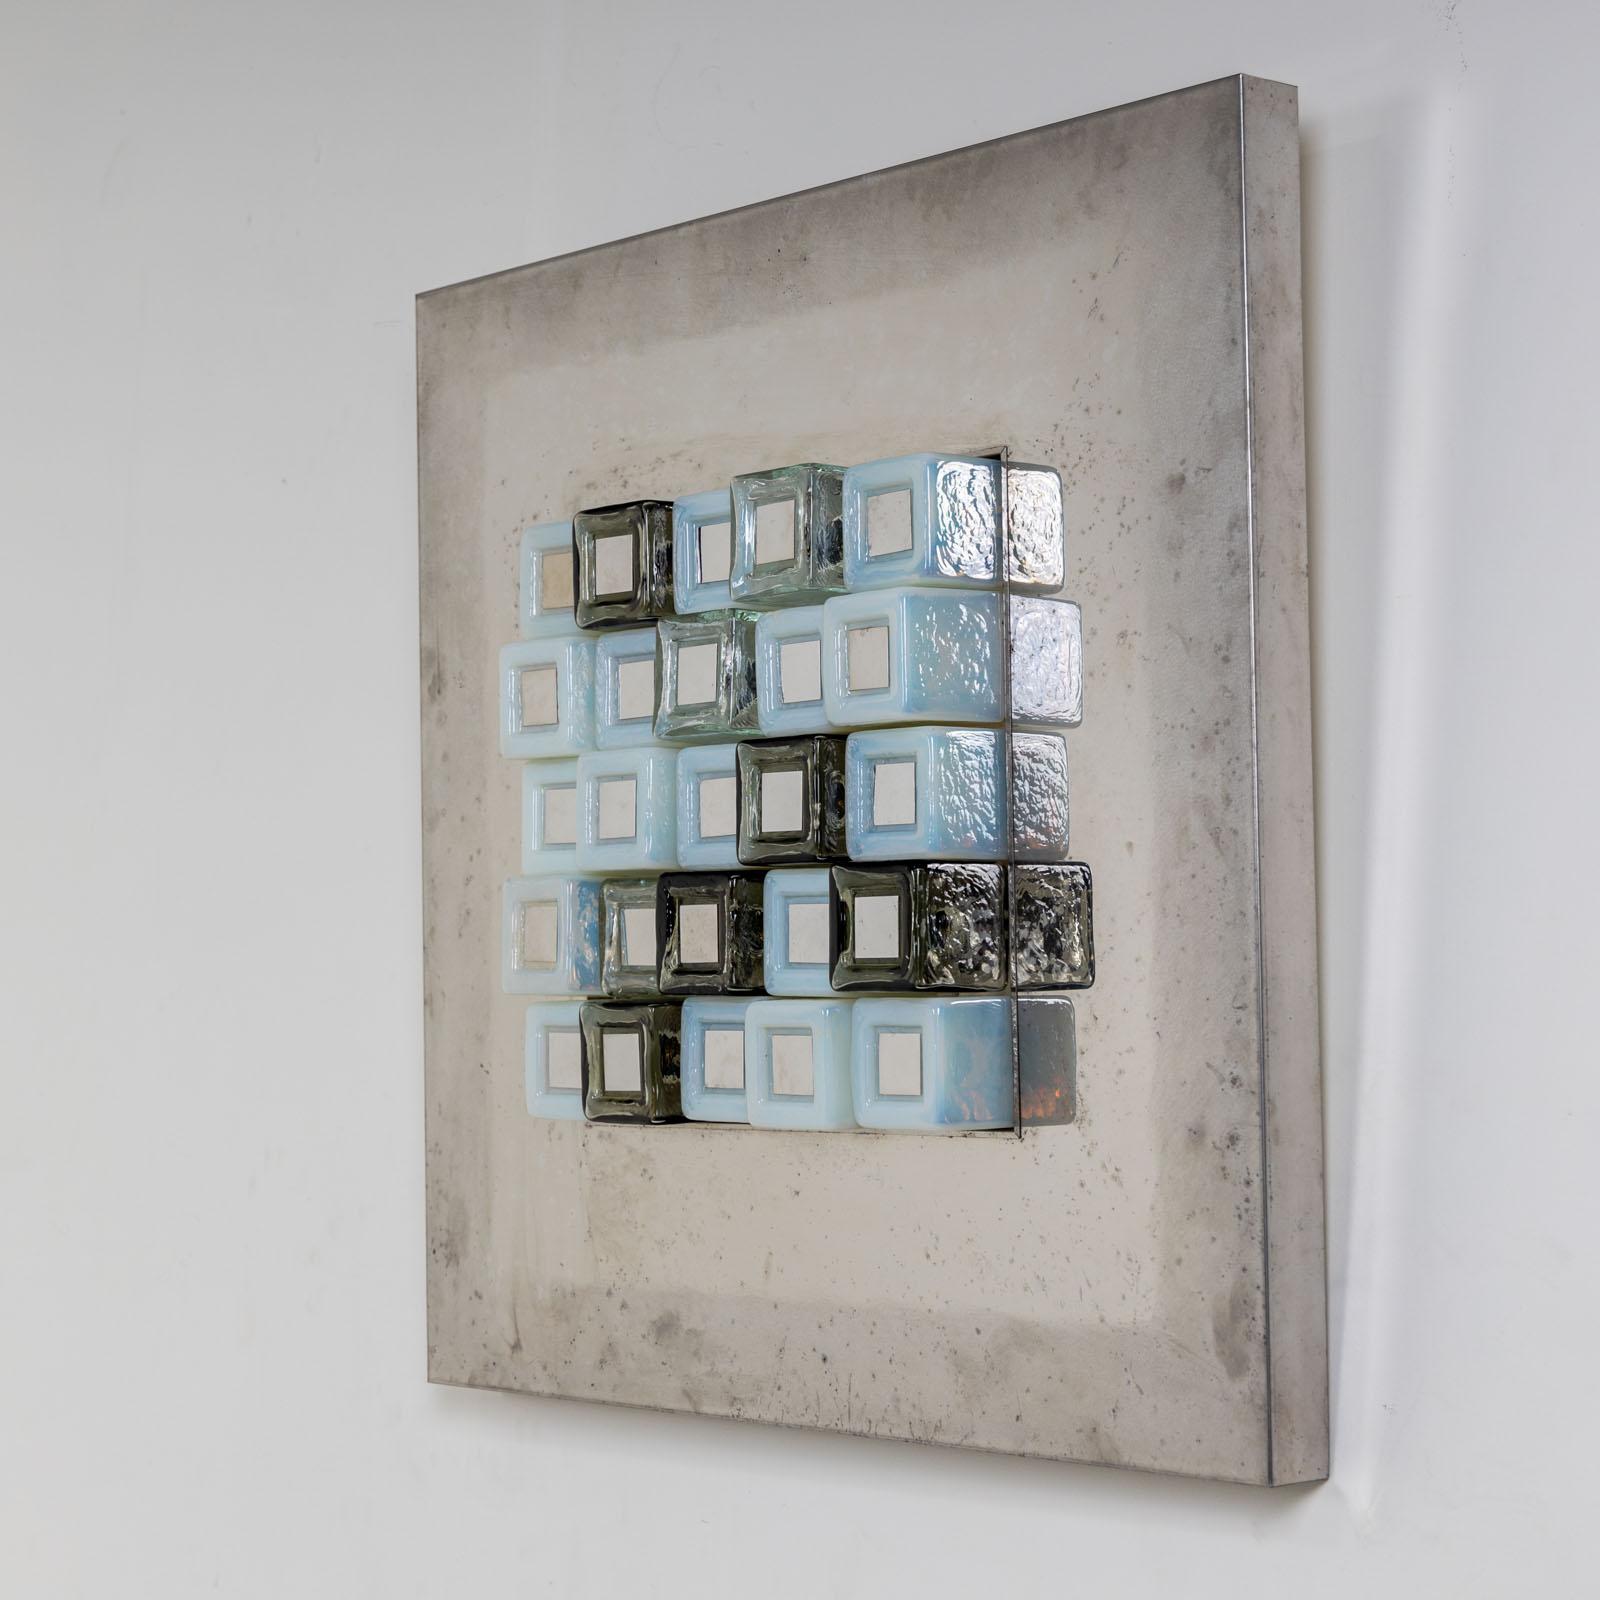 Illuminated wall object designed by Angelo Brotto (1914-2002) in the 1970s for Esperia. This unique lamp comprises a square metal plate and additional Murano glass blocks arranged in the center. The cubes are crafted from clear, opaque, and green